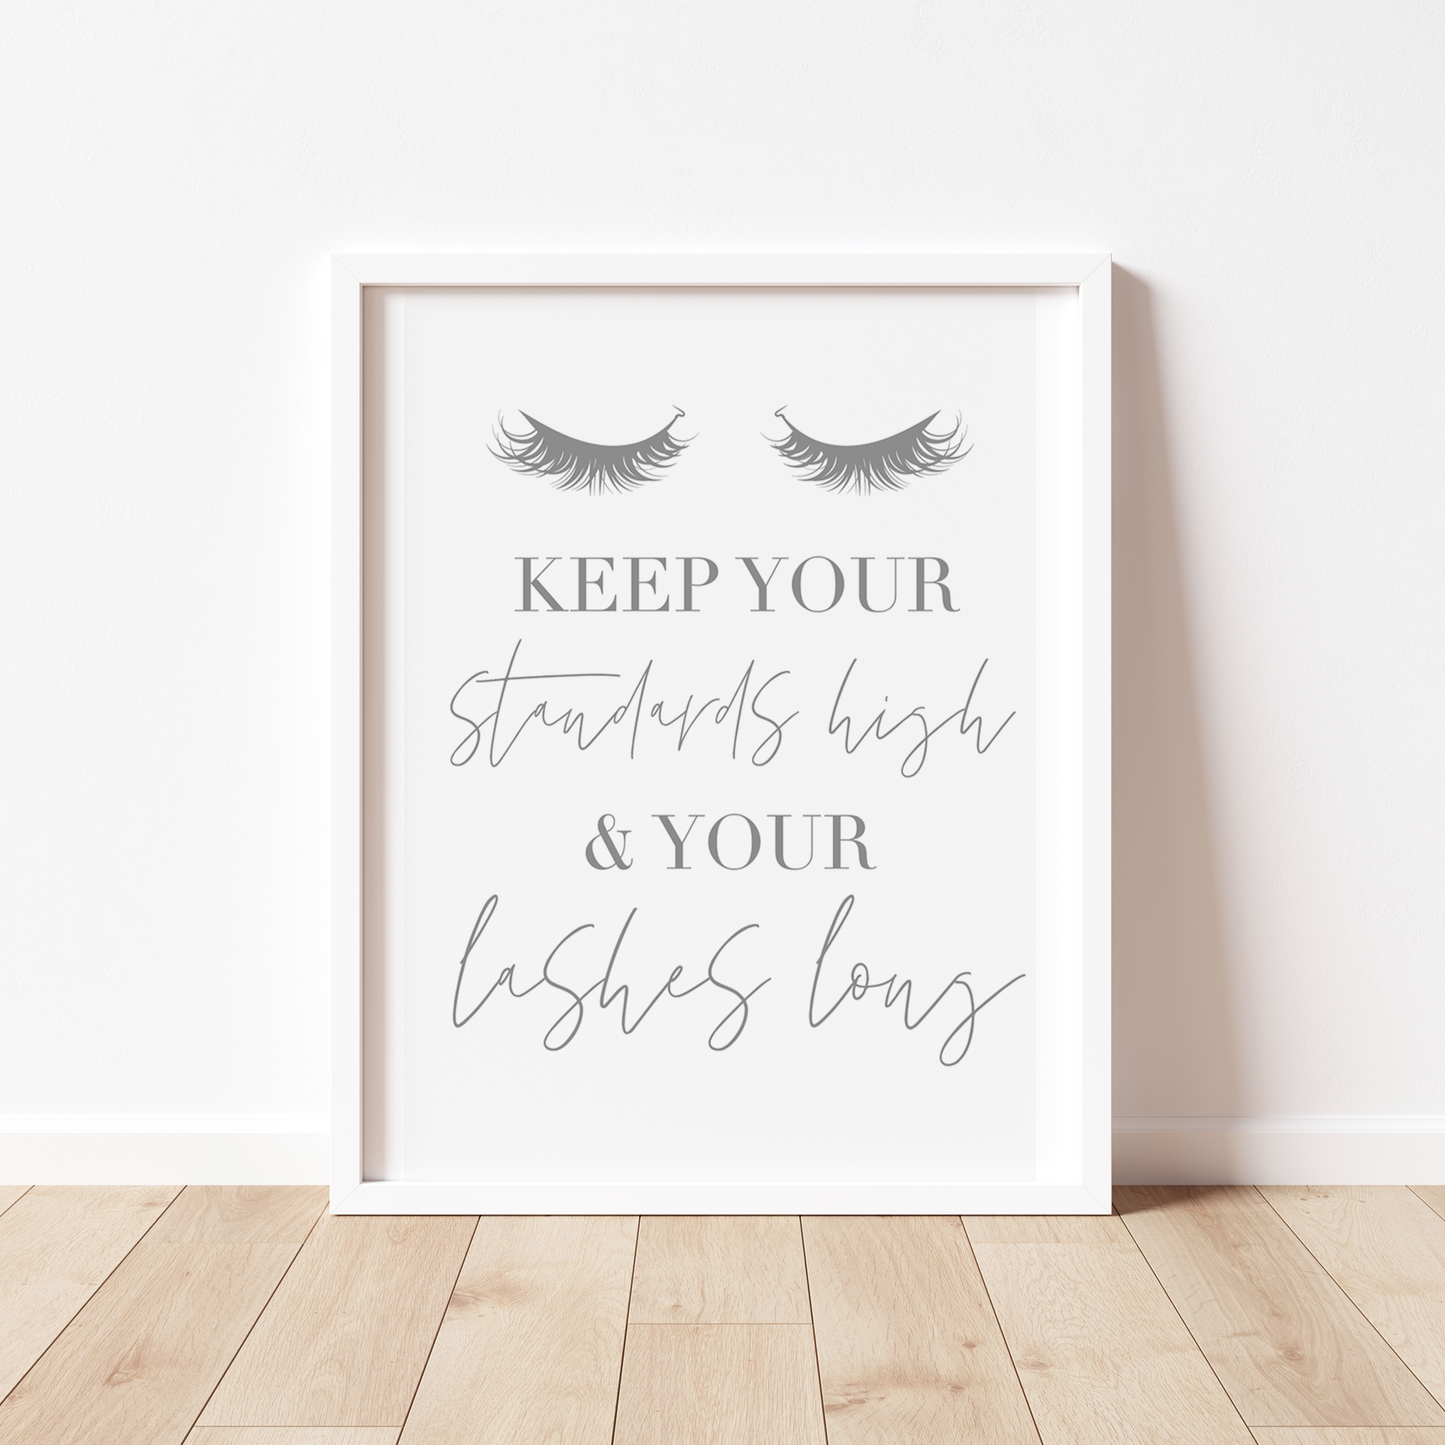 KEEP YOUR STANDARDS HIGH & YOUR LASHES LONG Print